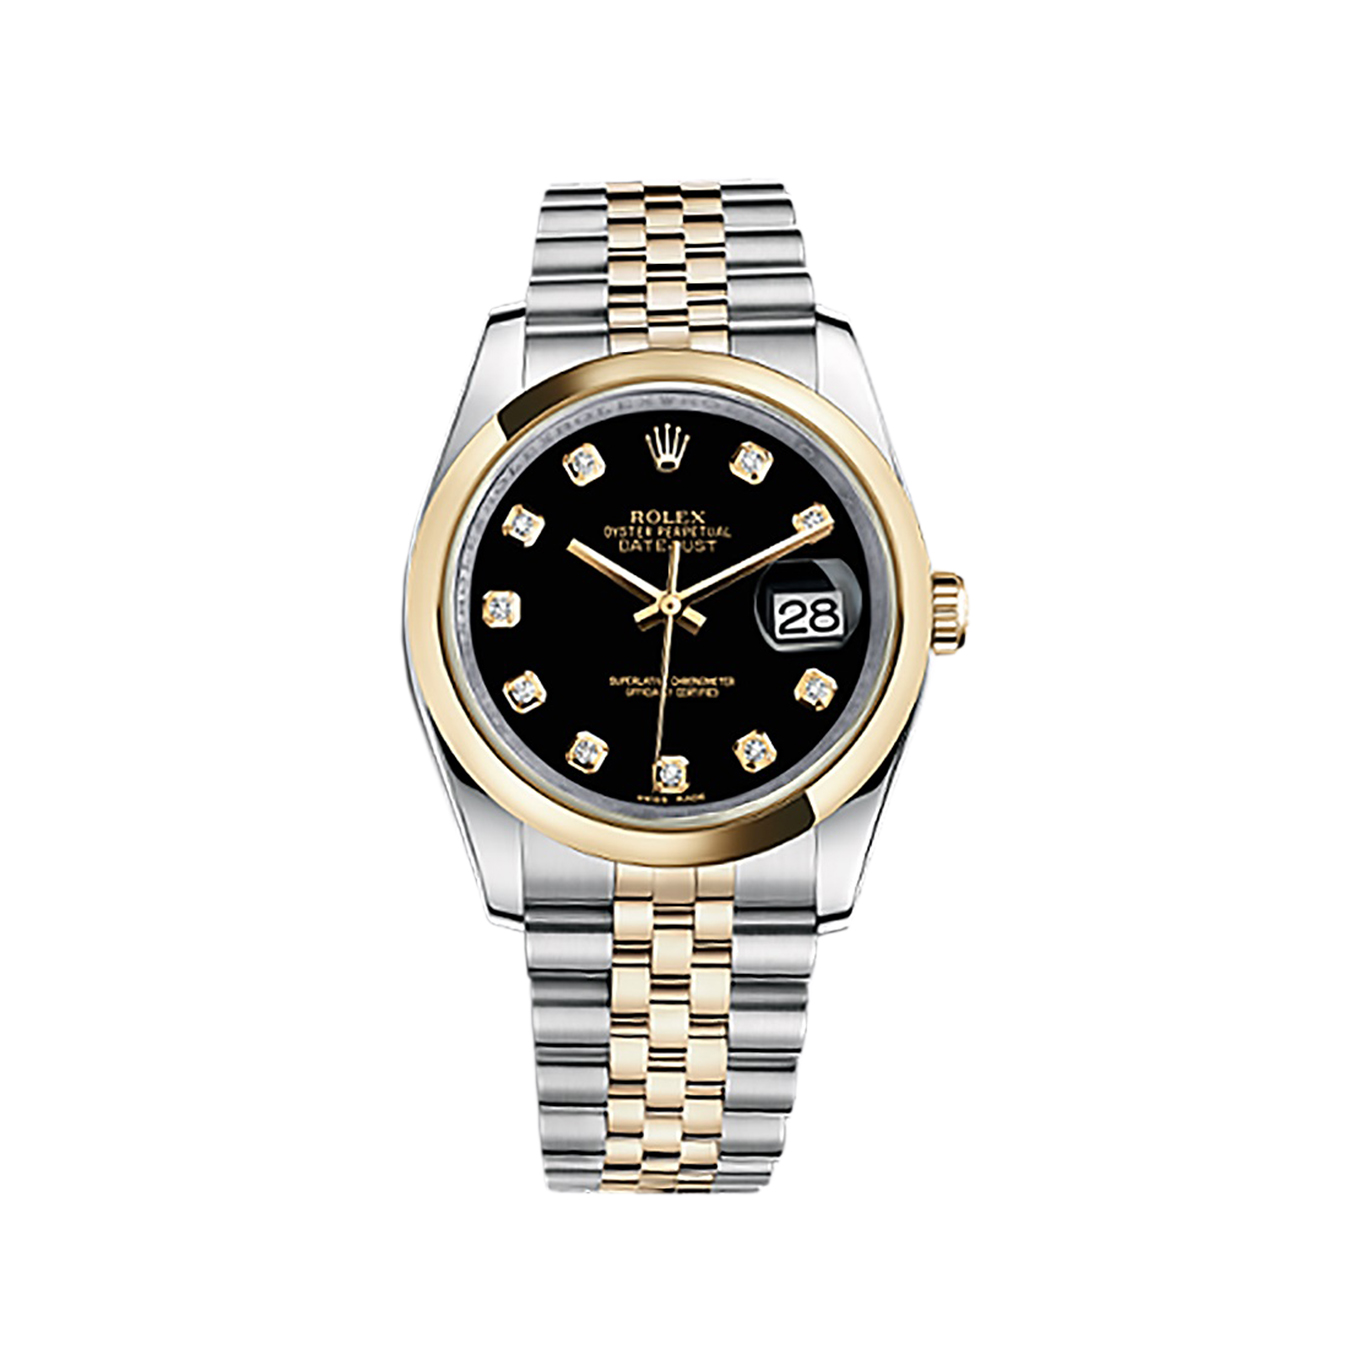 Datejust 36 116203 Gold & Stainless Steel Watch (Black Set with Diamonds)